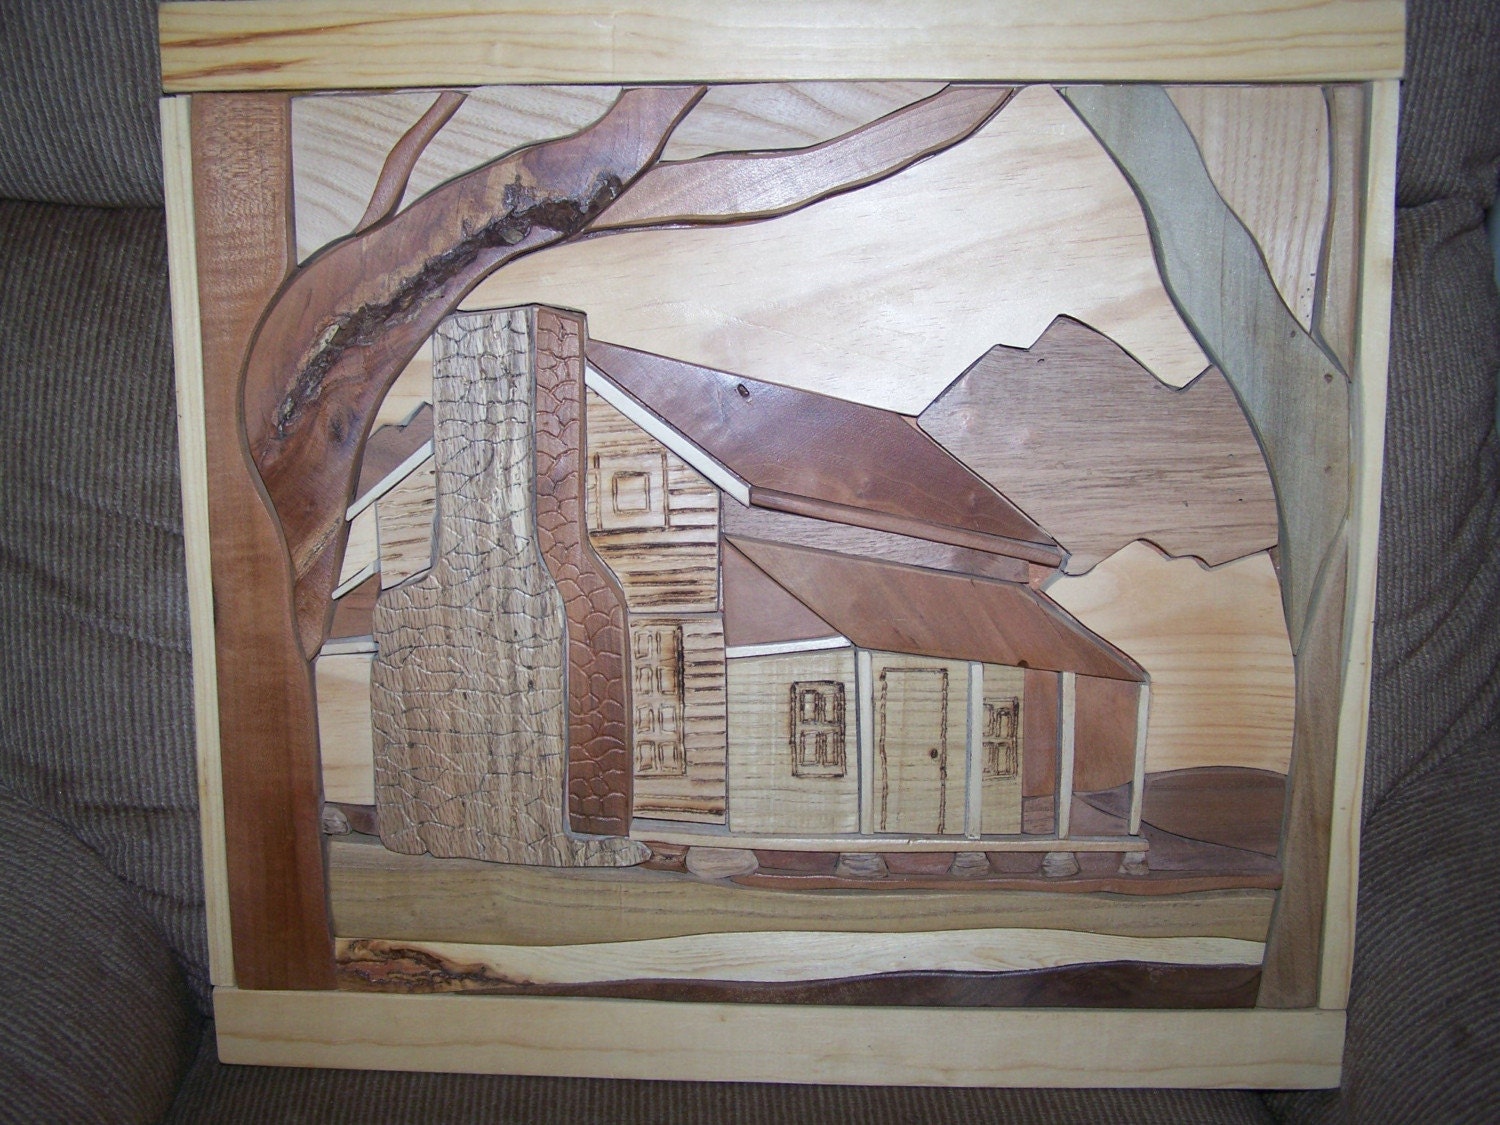 INTARSIA ROCKY TOP LOG CABIN sold, but we can make another one